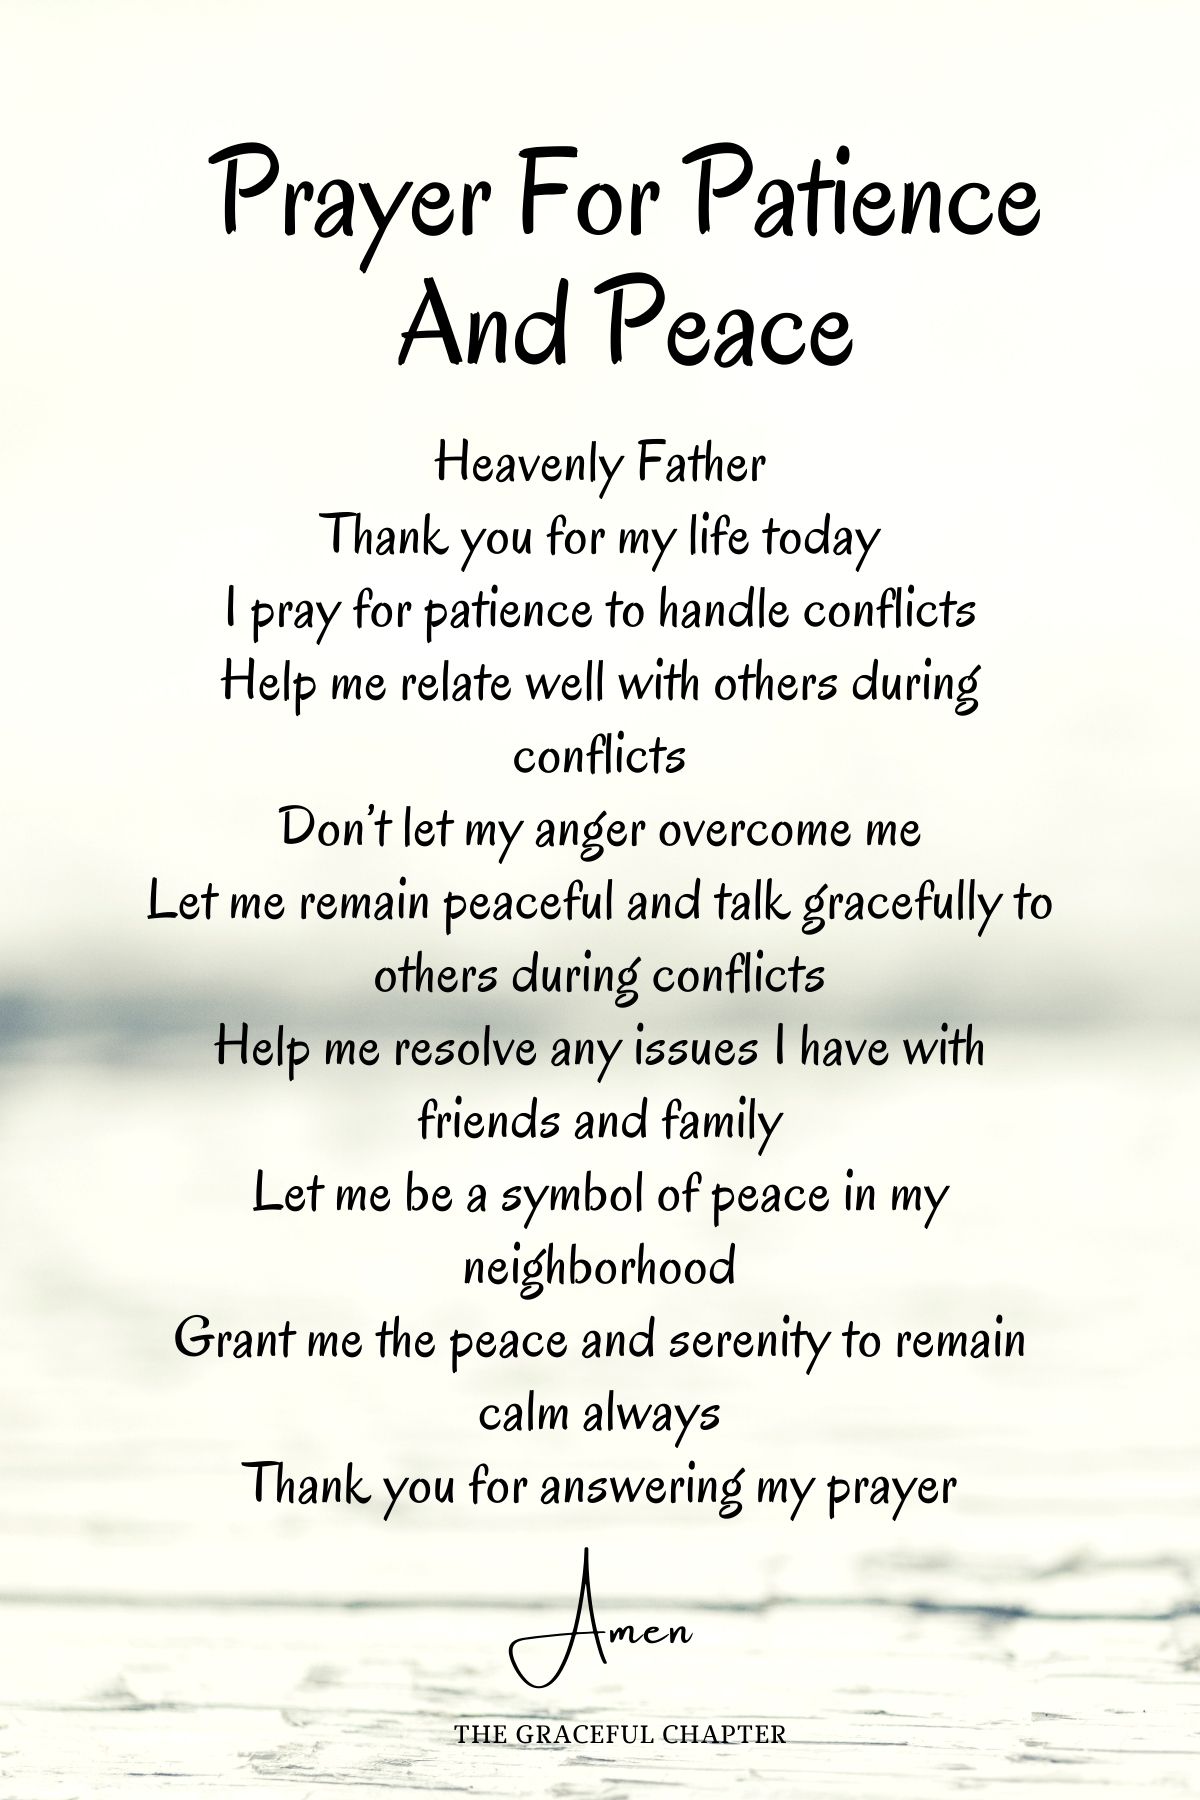 Prayer for patience and peace